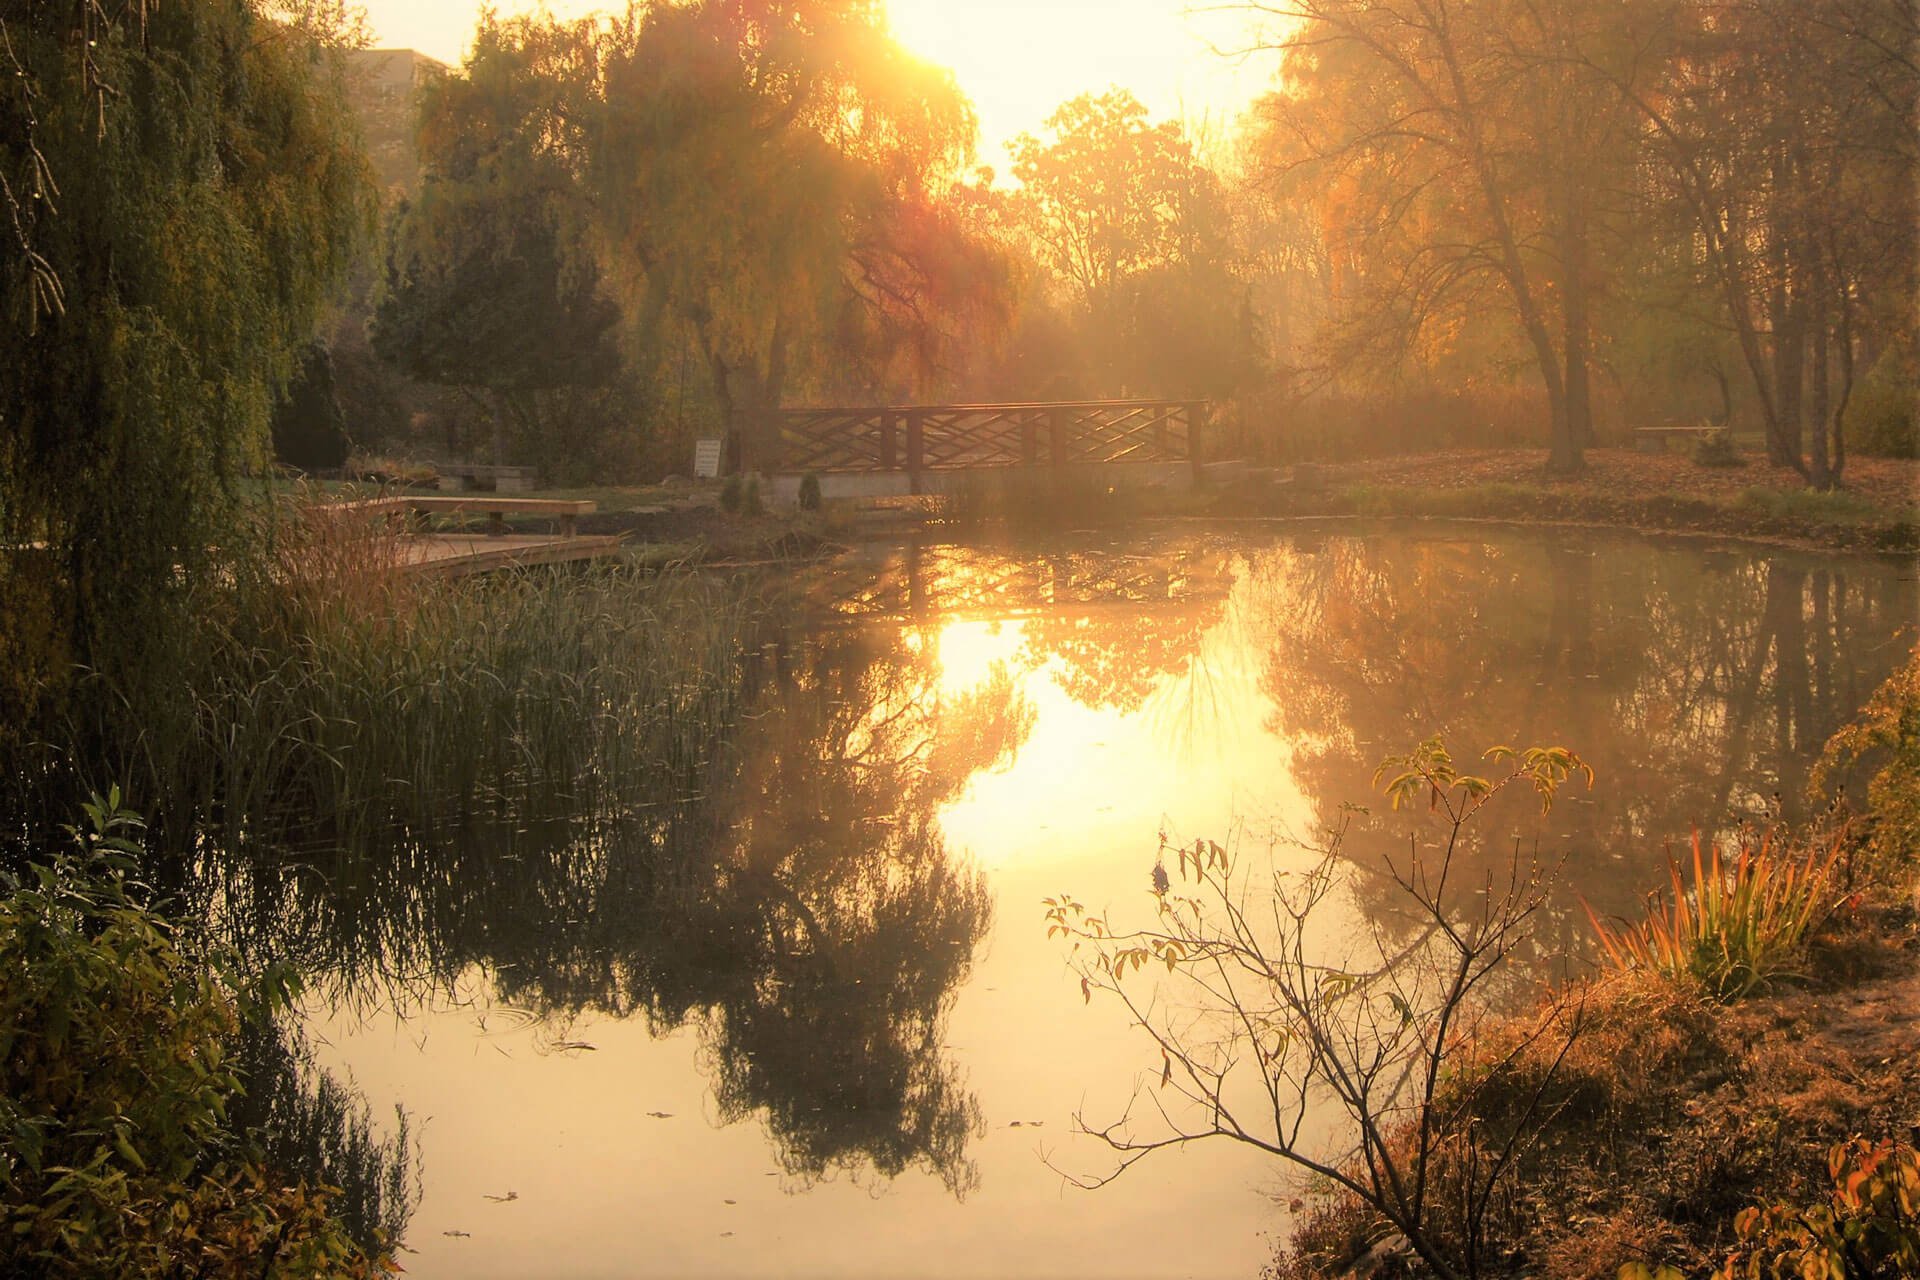 A photo of Humber College's Arboretum during Sunset in Spring. A small wooden bridge over a large pond is featured.